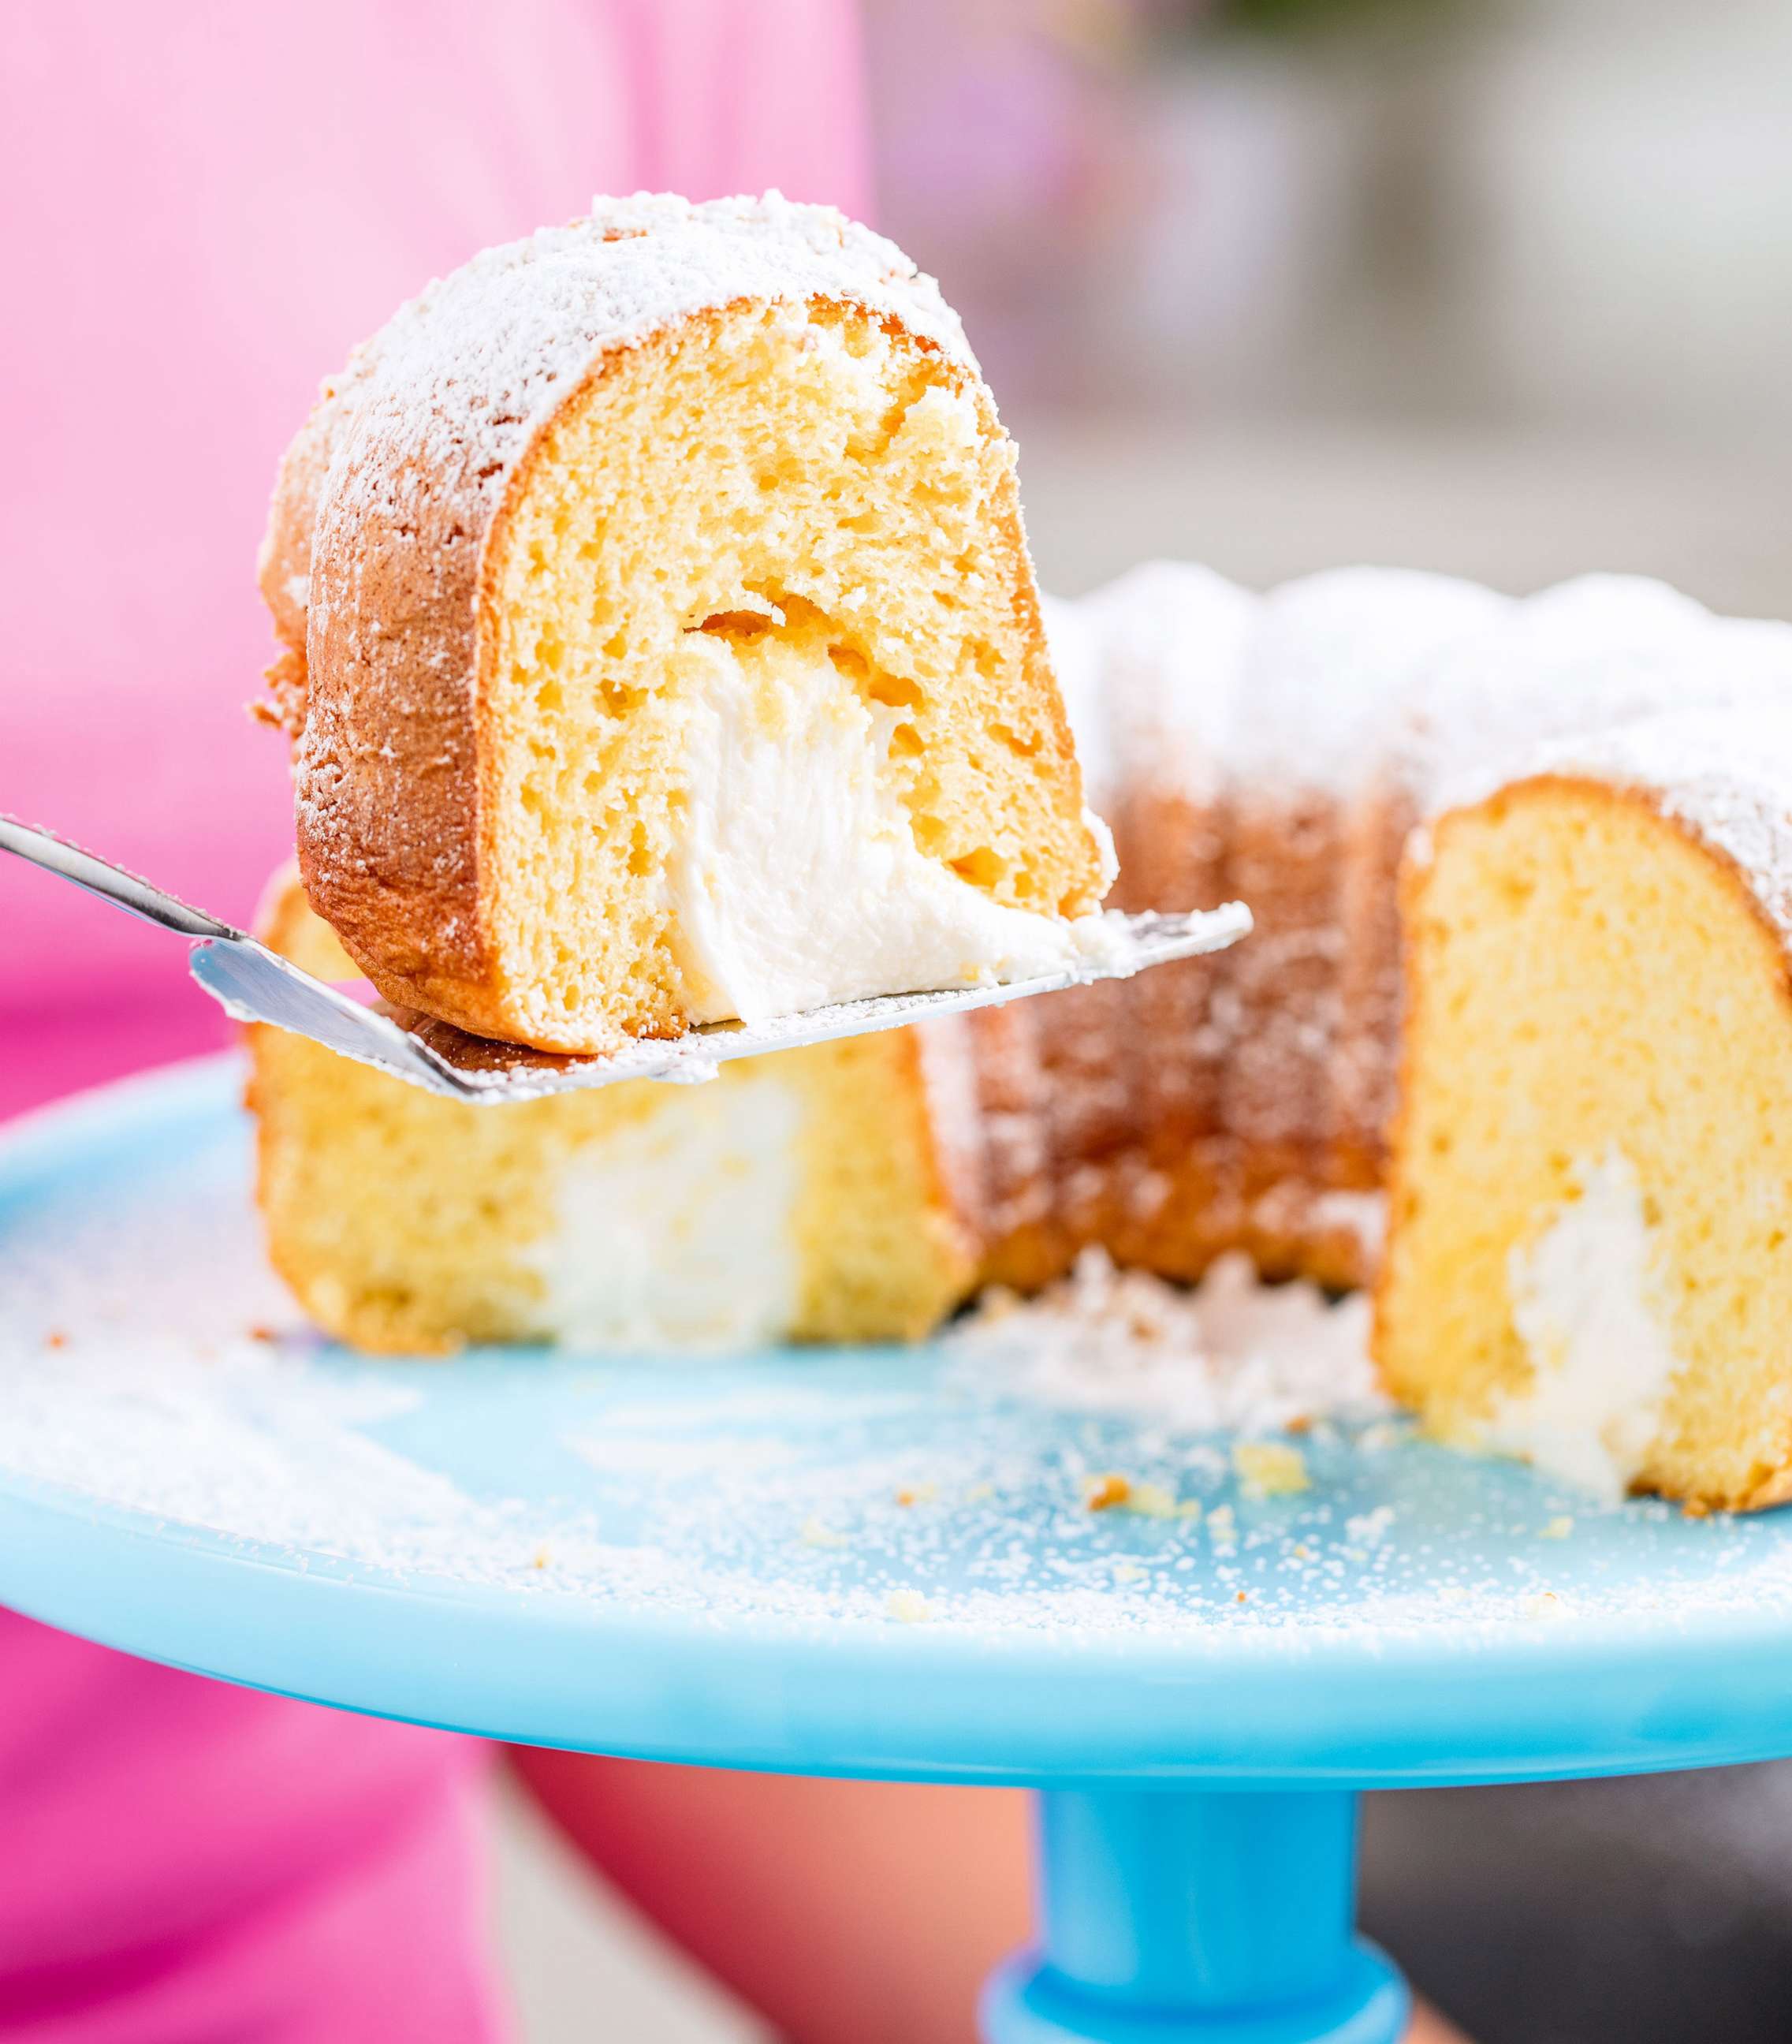 PHOTO: Giant Twinkie cake from the "Delish: Eat Like Every Day's The Weekend" cookbook.